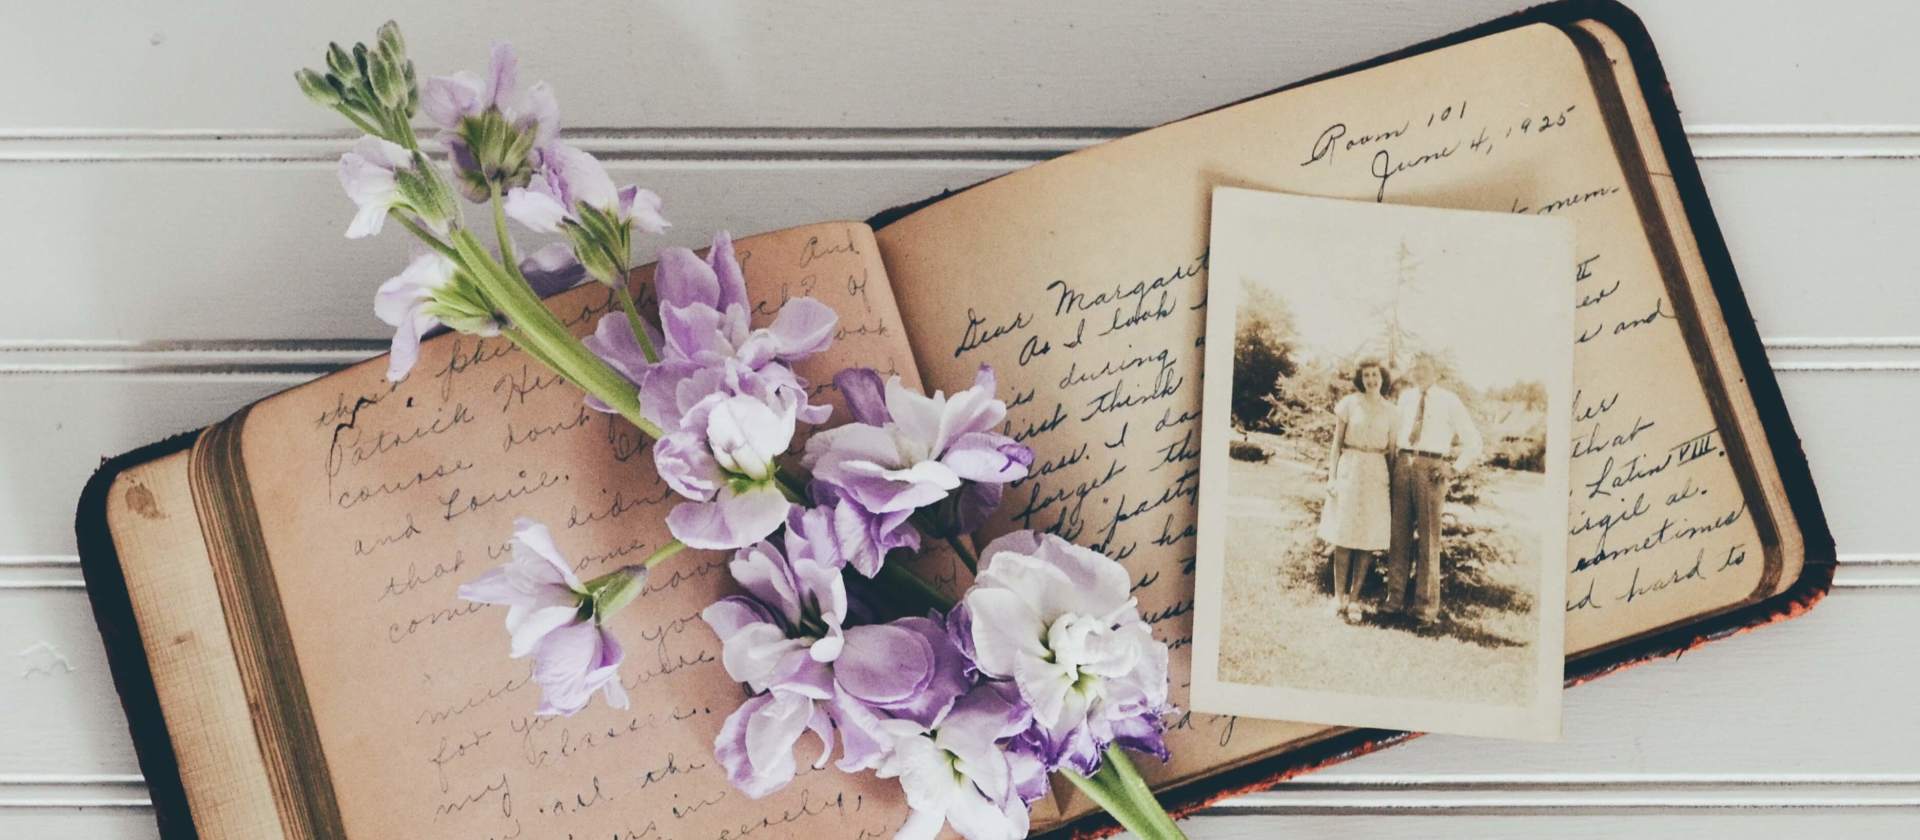 personalizing a funeral service old book and photograph purple flowers